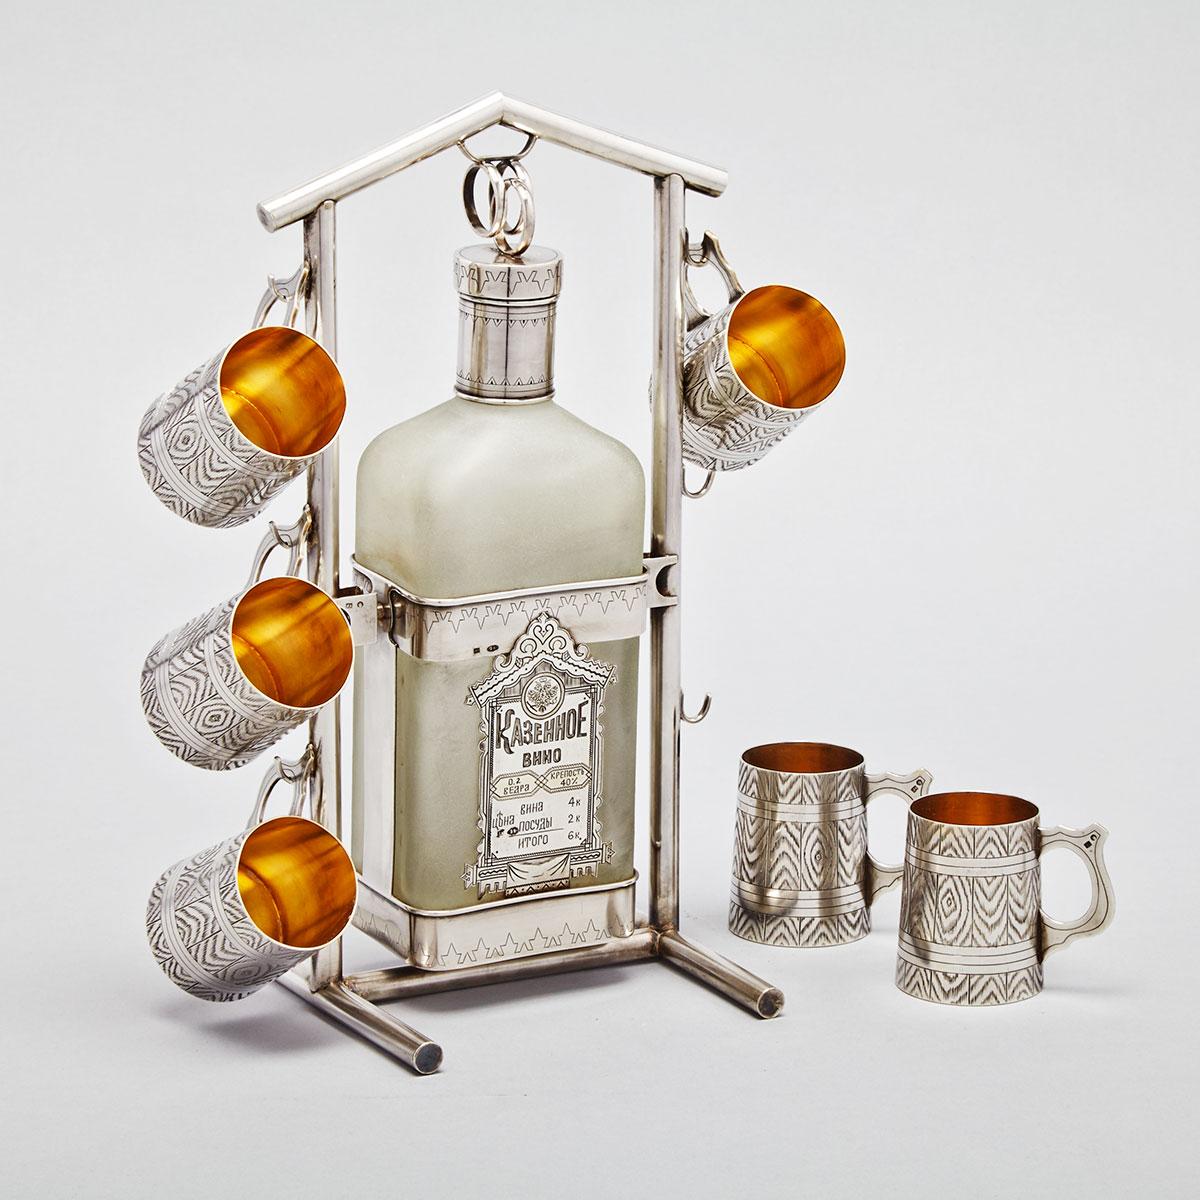 Russian Trompe L’Oeil Silver and Frosted Glass Vodka Tantalus with Six Cups, Ivan Khlebnikov, Moscow, c.1908-17